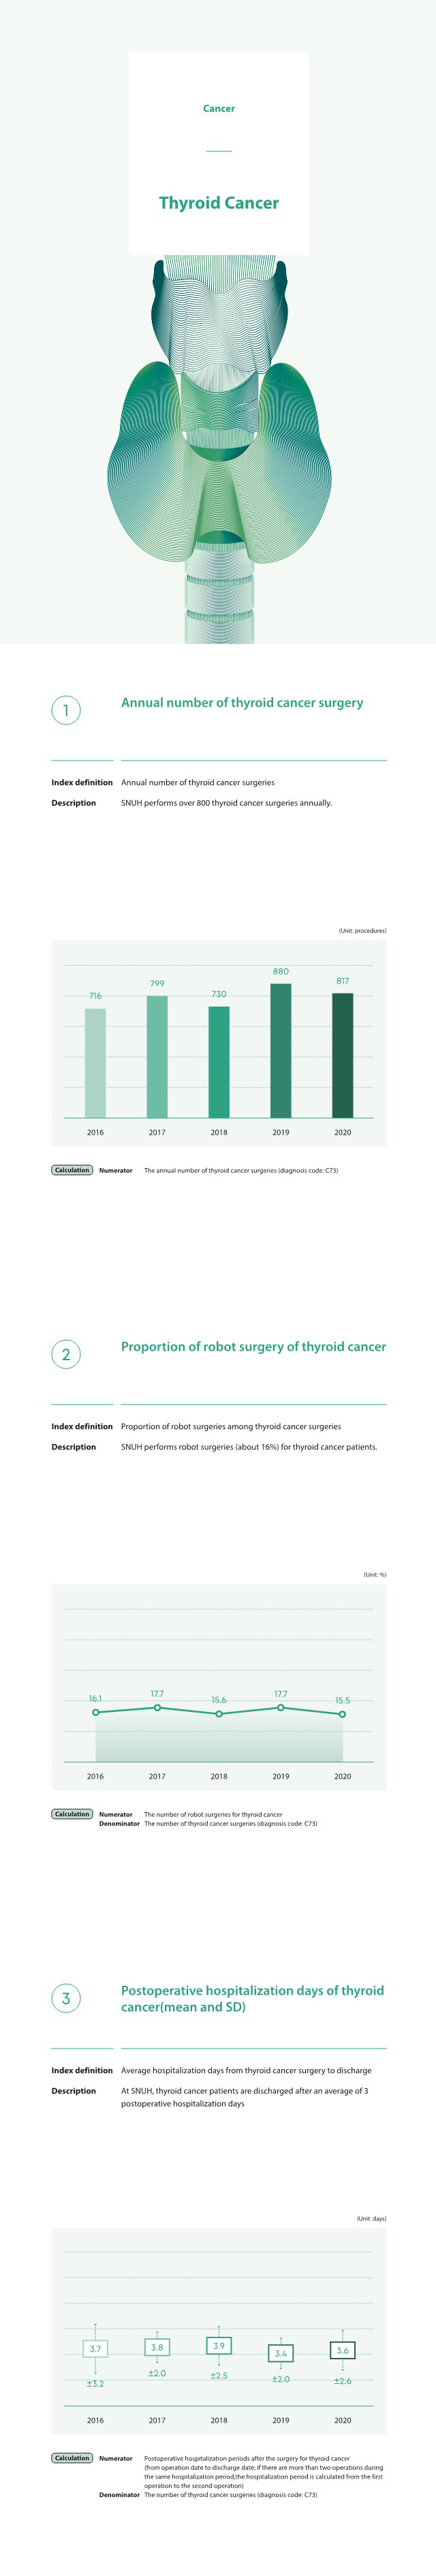 Thyroid Cancer, Annual number of thyroid cancer surgeries, SNUH performs over 800 thyroid cancer surgeries annually